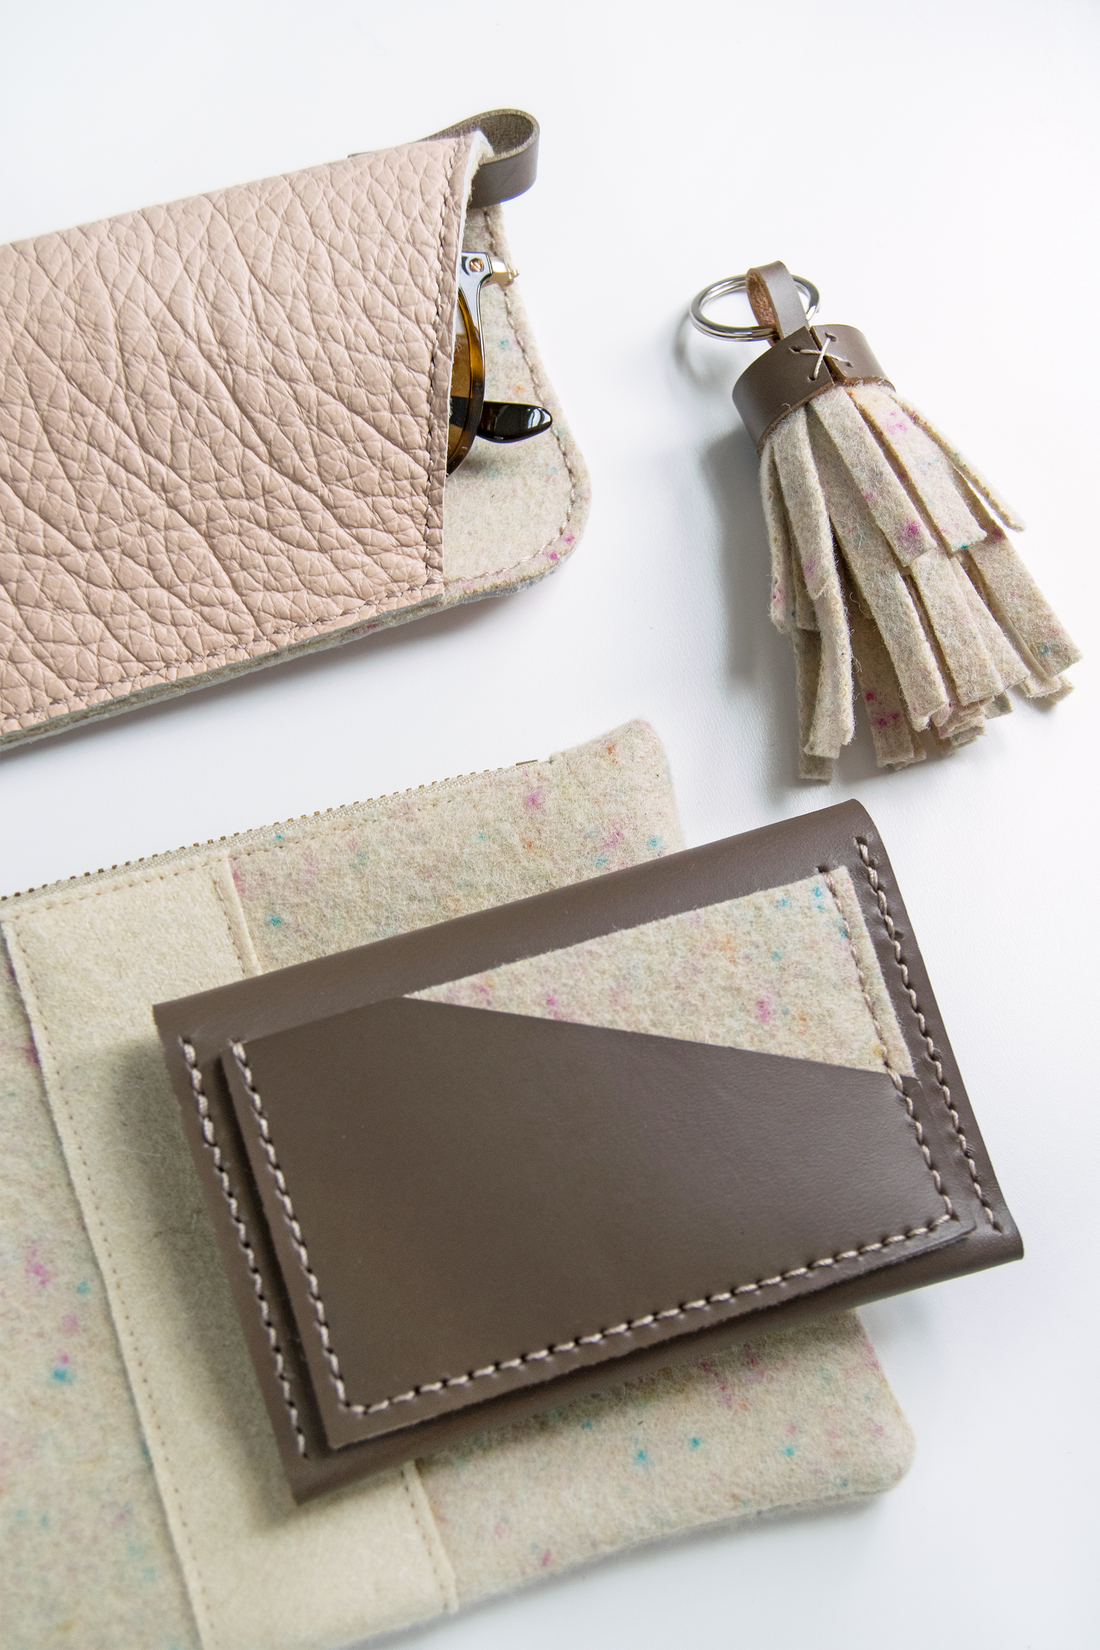 Blush leather glasses sleeve paired with confetti tassel keychain, confetti zip pouch and taupe leather card holder.